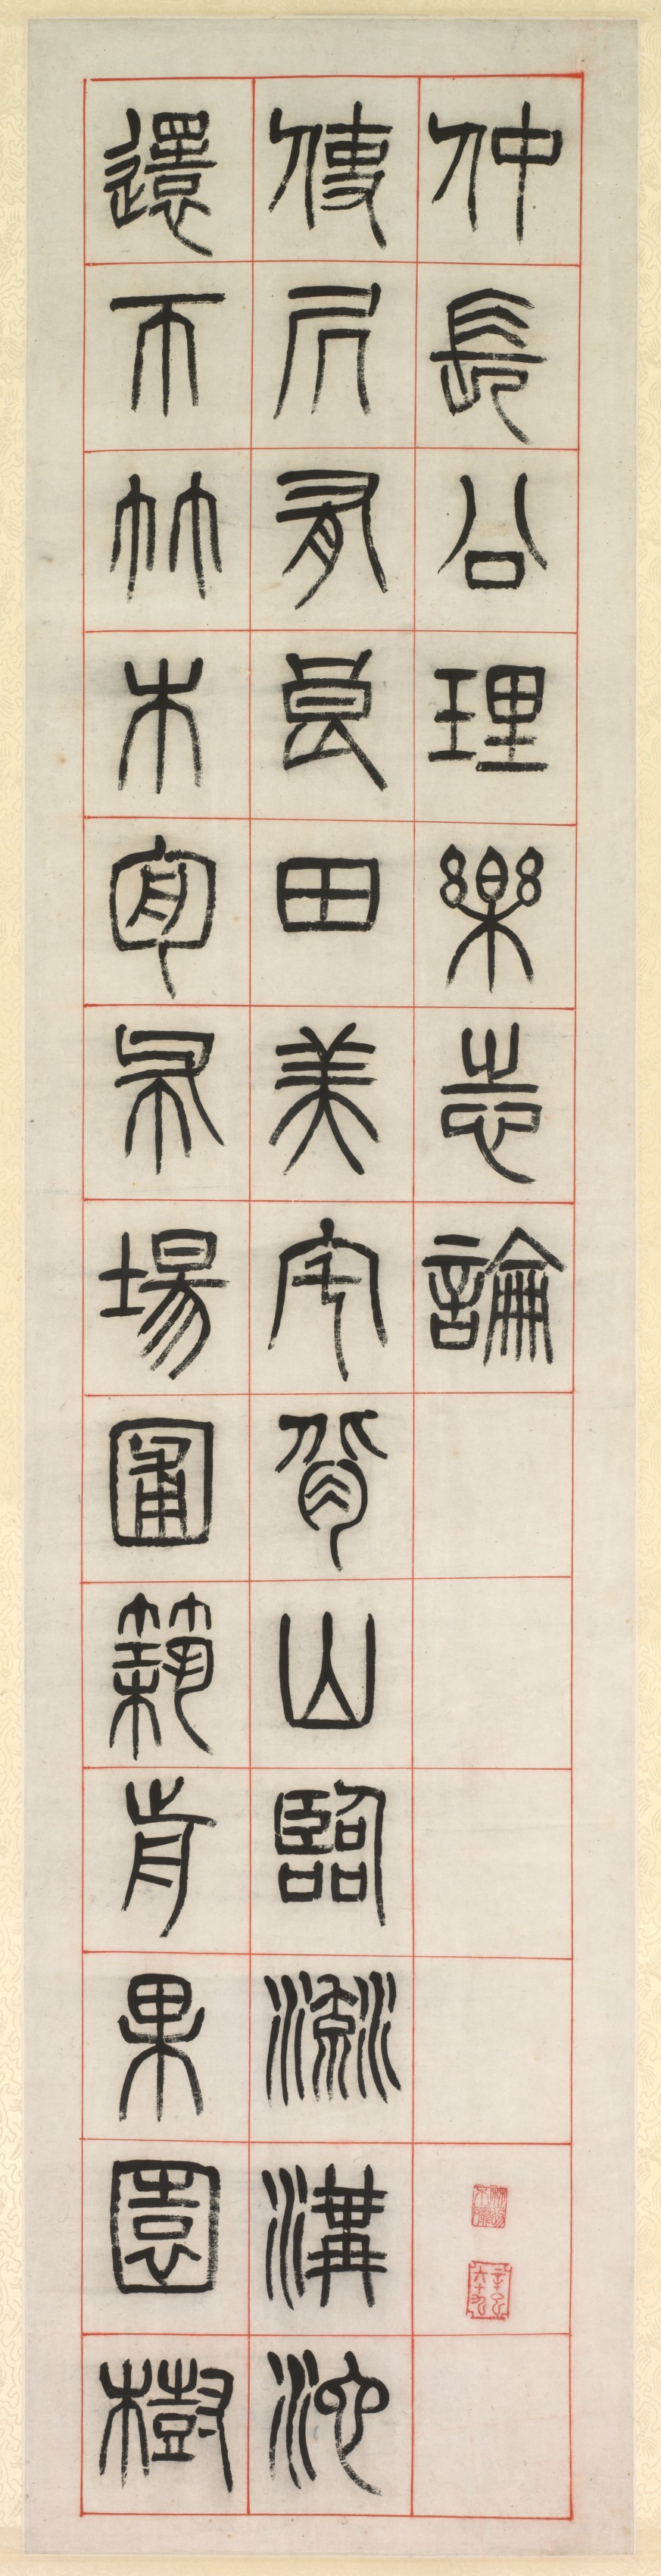 On Happiness, Calligraphy in Seal Script Style (zhuanshu)